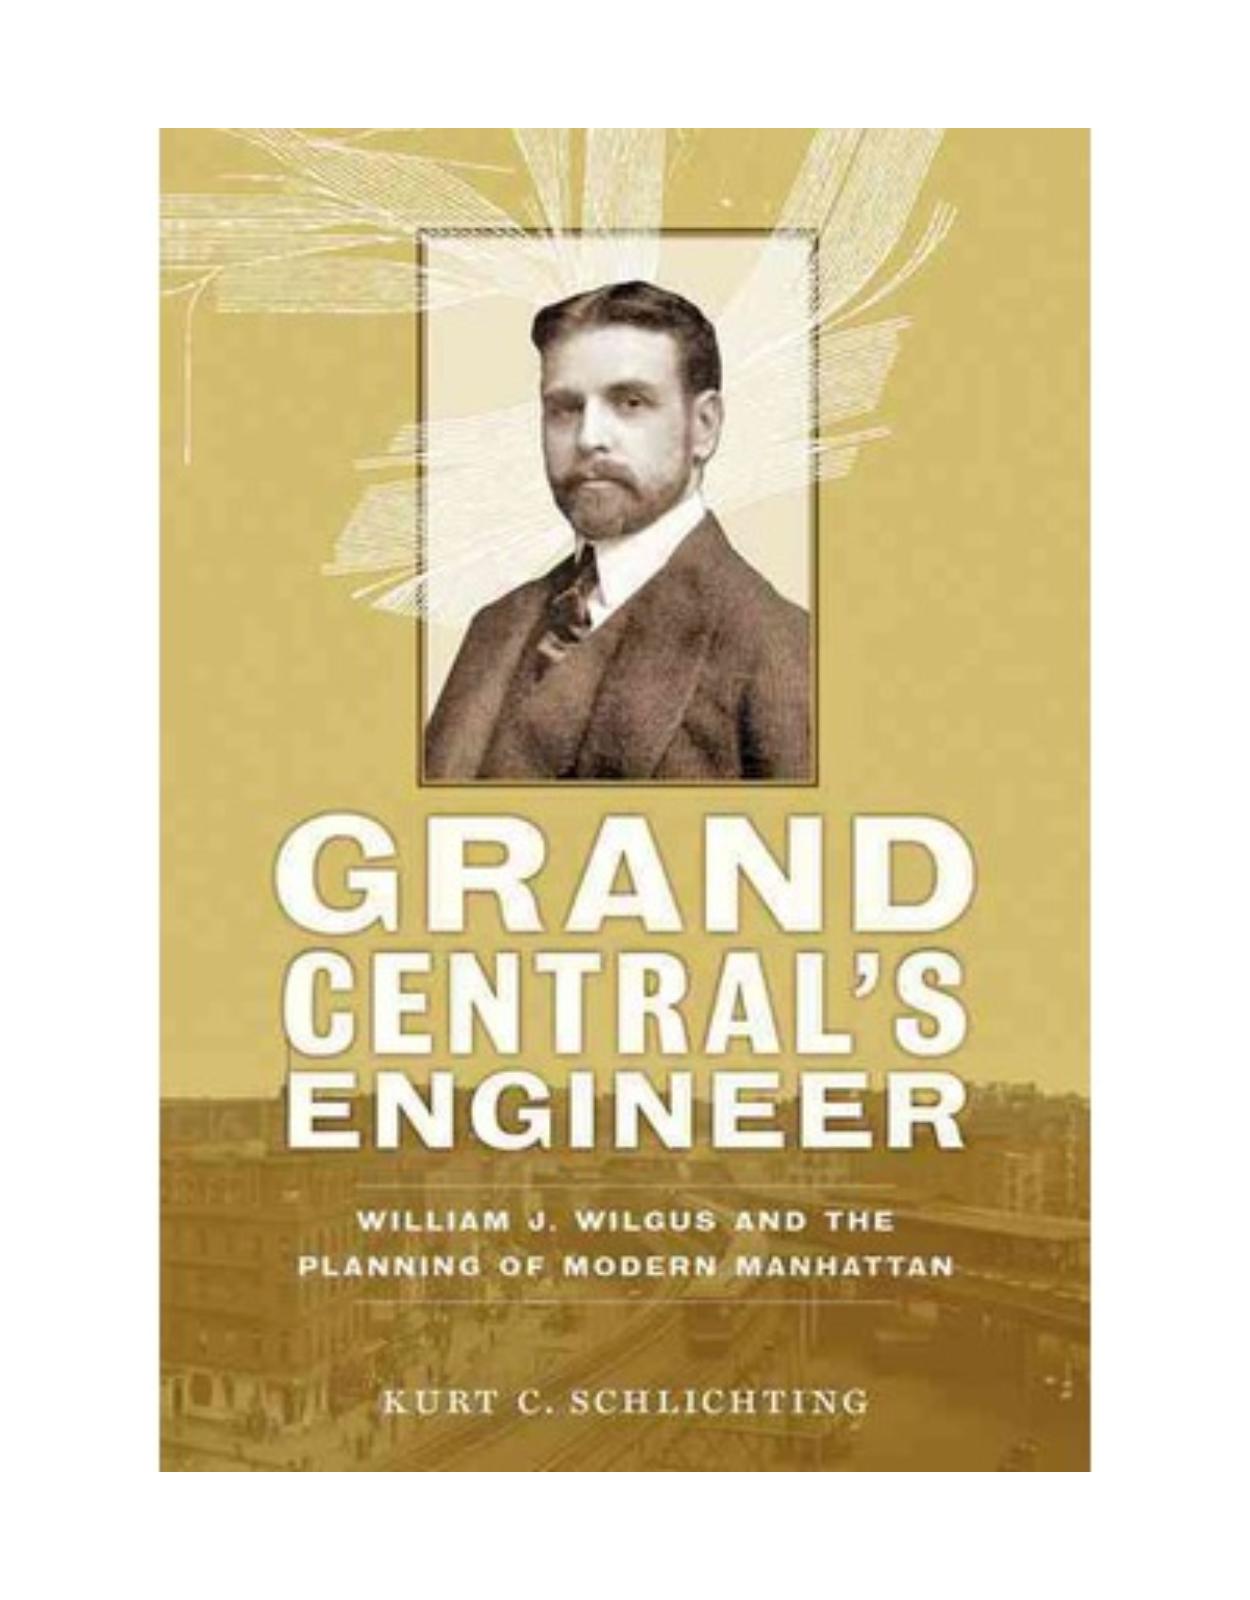 Grand Central's Engineer. William J. Wilgus and the Planning of Modern Manhattan